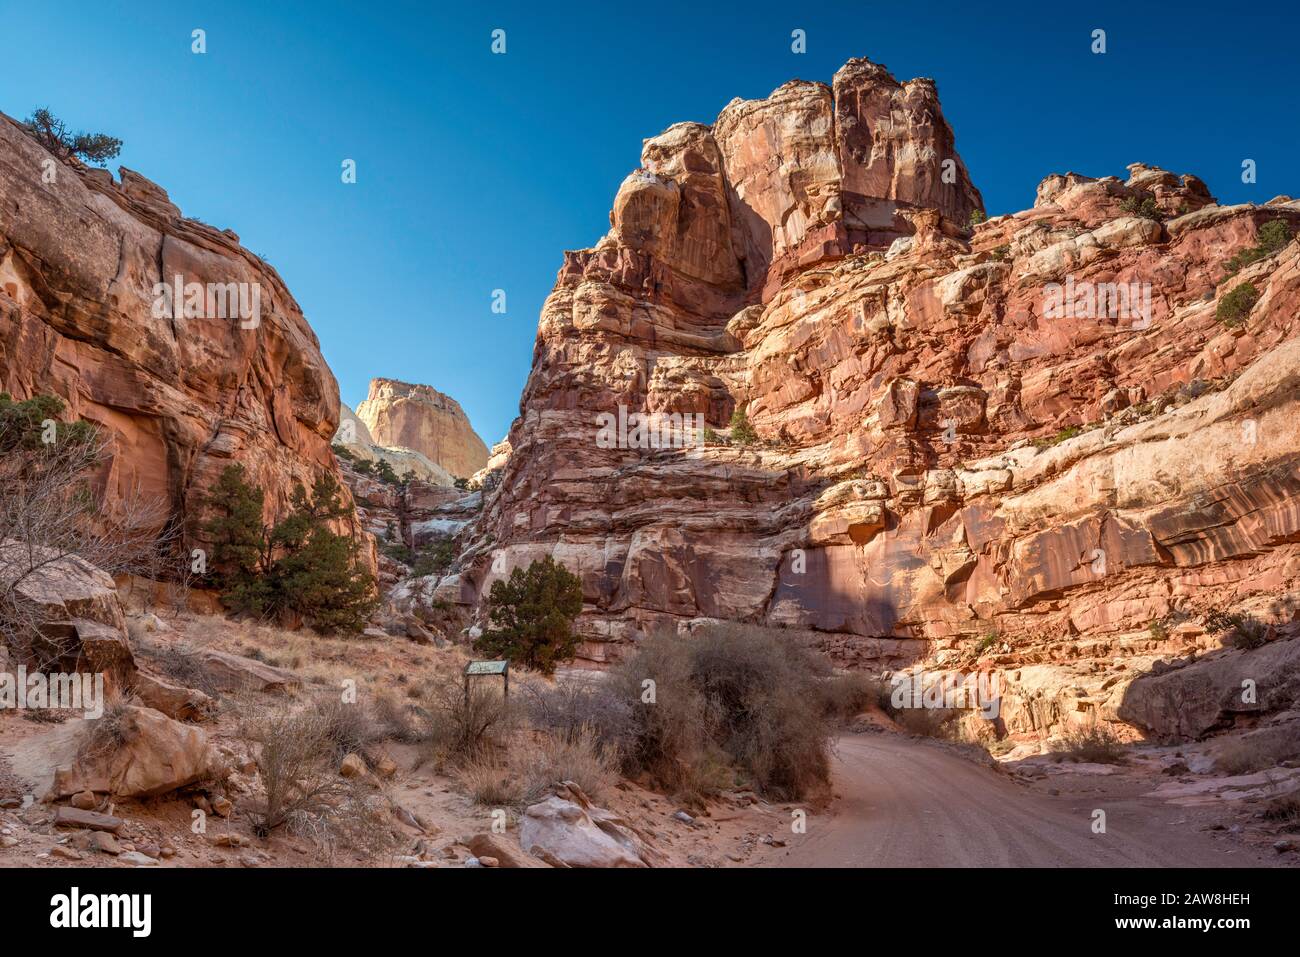 Klippen in der Capitol Gorge, Canyon im Capitol Reef National Park, Golden Throne Formation in Distance, Colorado Plateau, Utah, USA Stockfoto